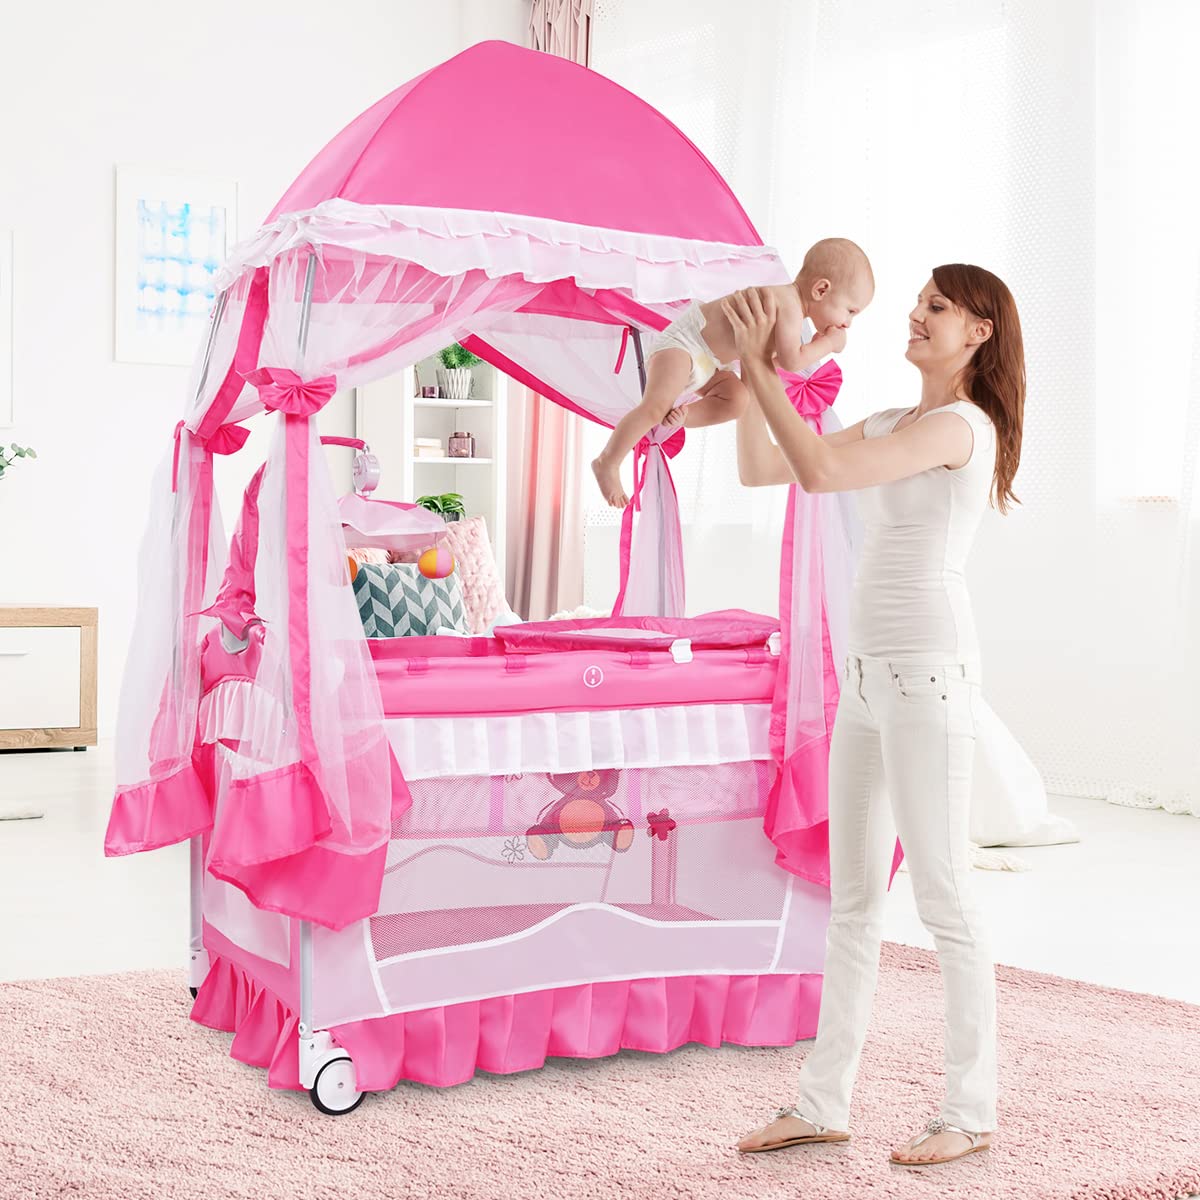 BABY JOY 4 in 1 Pack and Play with Extended Canopy, Portable Baby Playard Bedside Sleeper with Side Zipper Entrance, Wheels & Brake, Baby Girl Pink Bassinet Crib from Newborn to Toddler